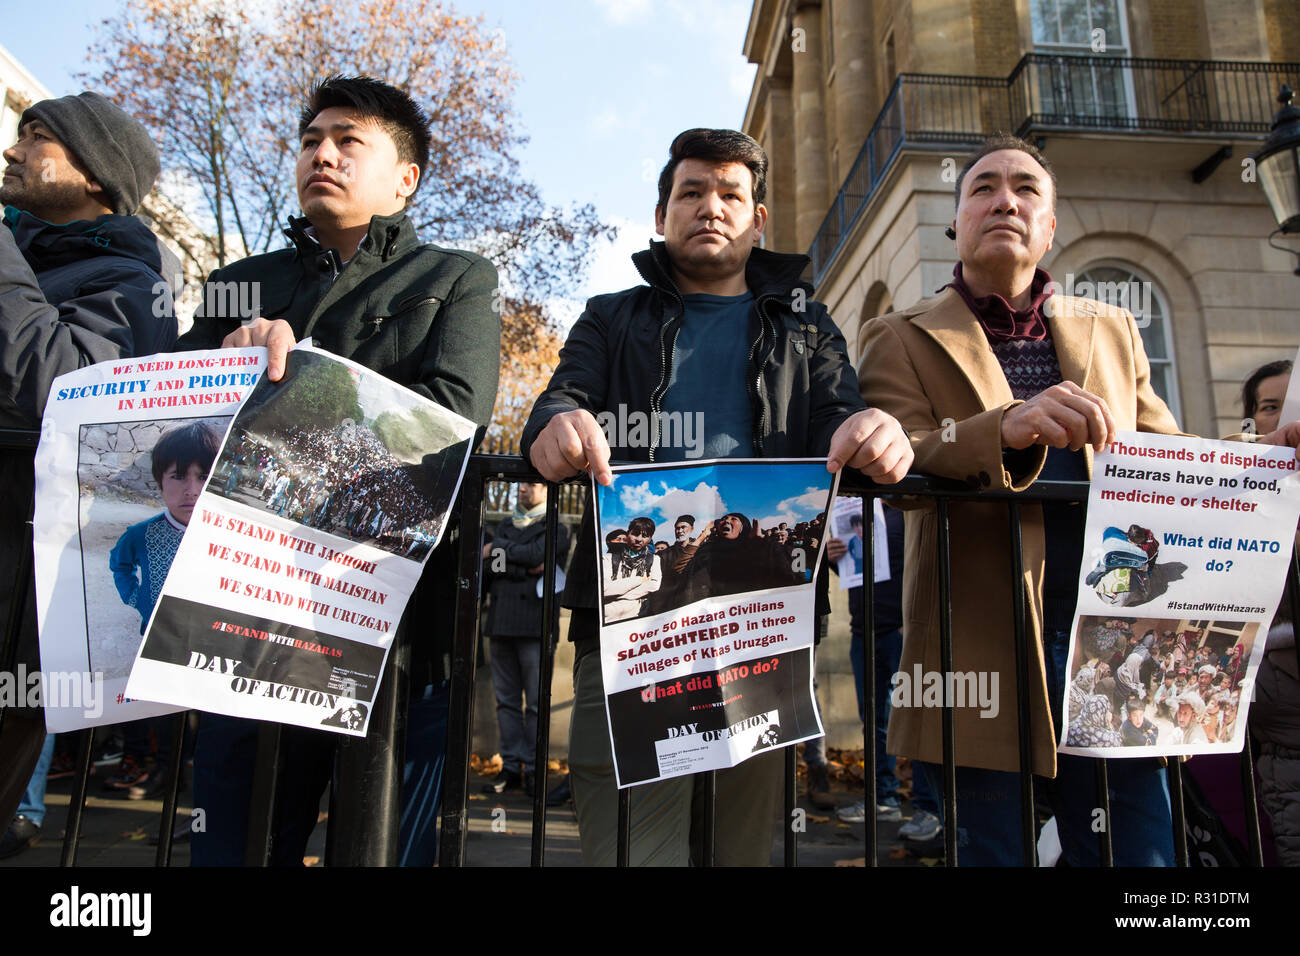 London, UK. 21st November, 2018. Members of the Hazara community, an ethnic group native to the region of Hazarajat in central Afghanistan, protest opposite Downing Street against a lack of assistance from the Afghan government in the face of attacks by the Taliban and Islamic State. Credit: Mark Kerrison/Alamy Live News Stock Photo